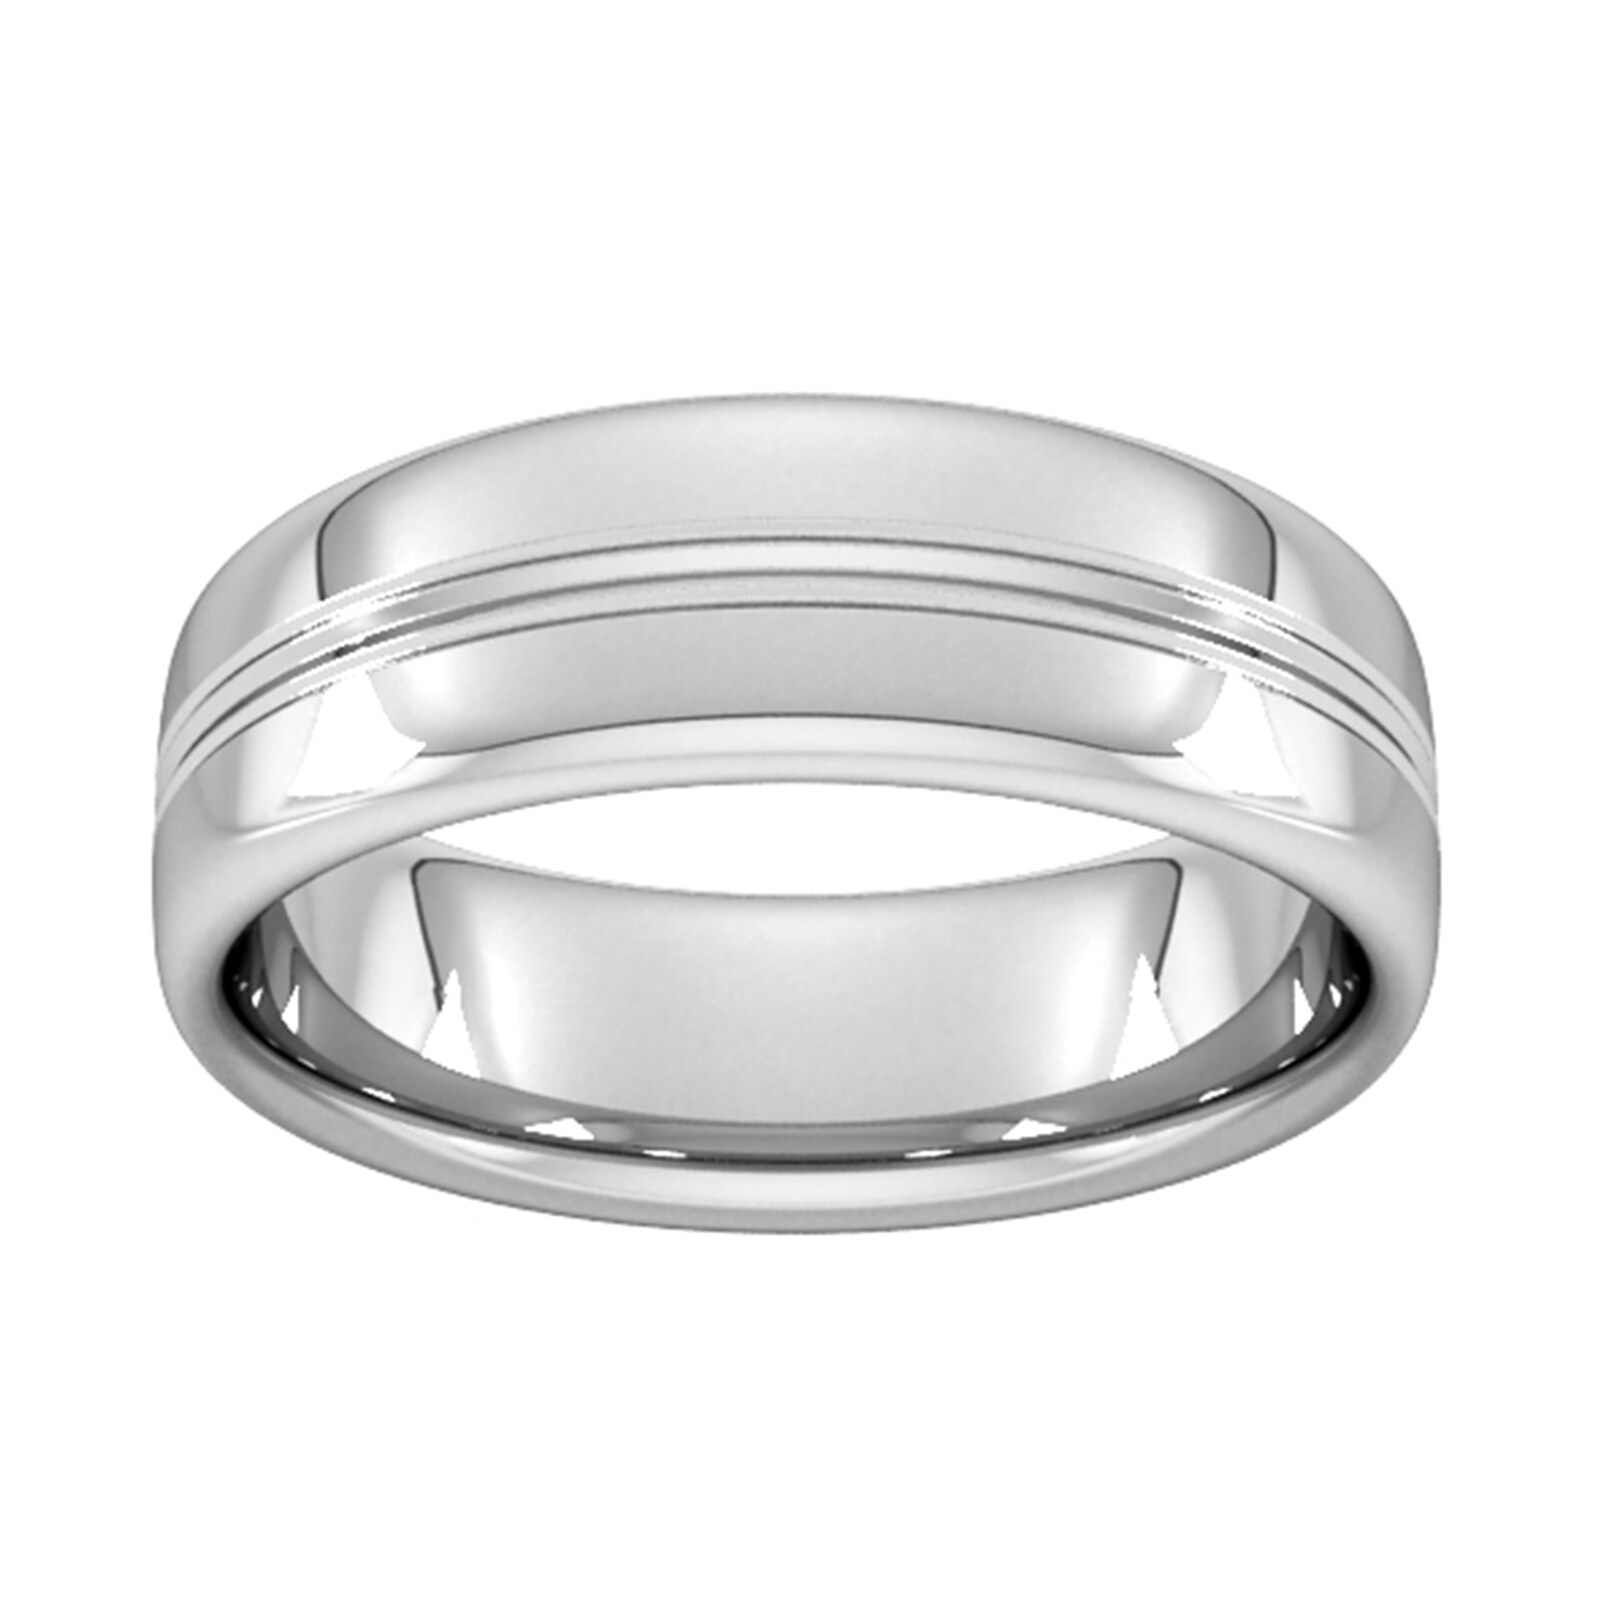 7mm Slight Court Extra Heavy Grooved Polished Finish Wedding Ring In 9 Carat White Gold - Ring Size I